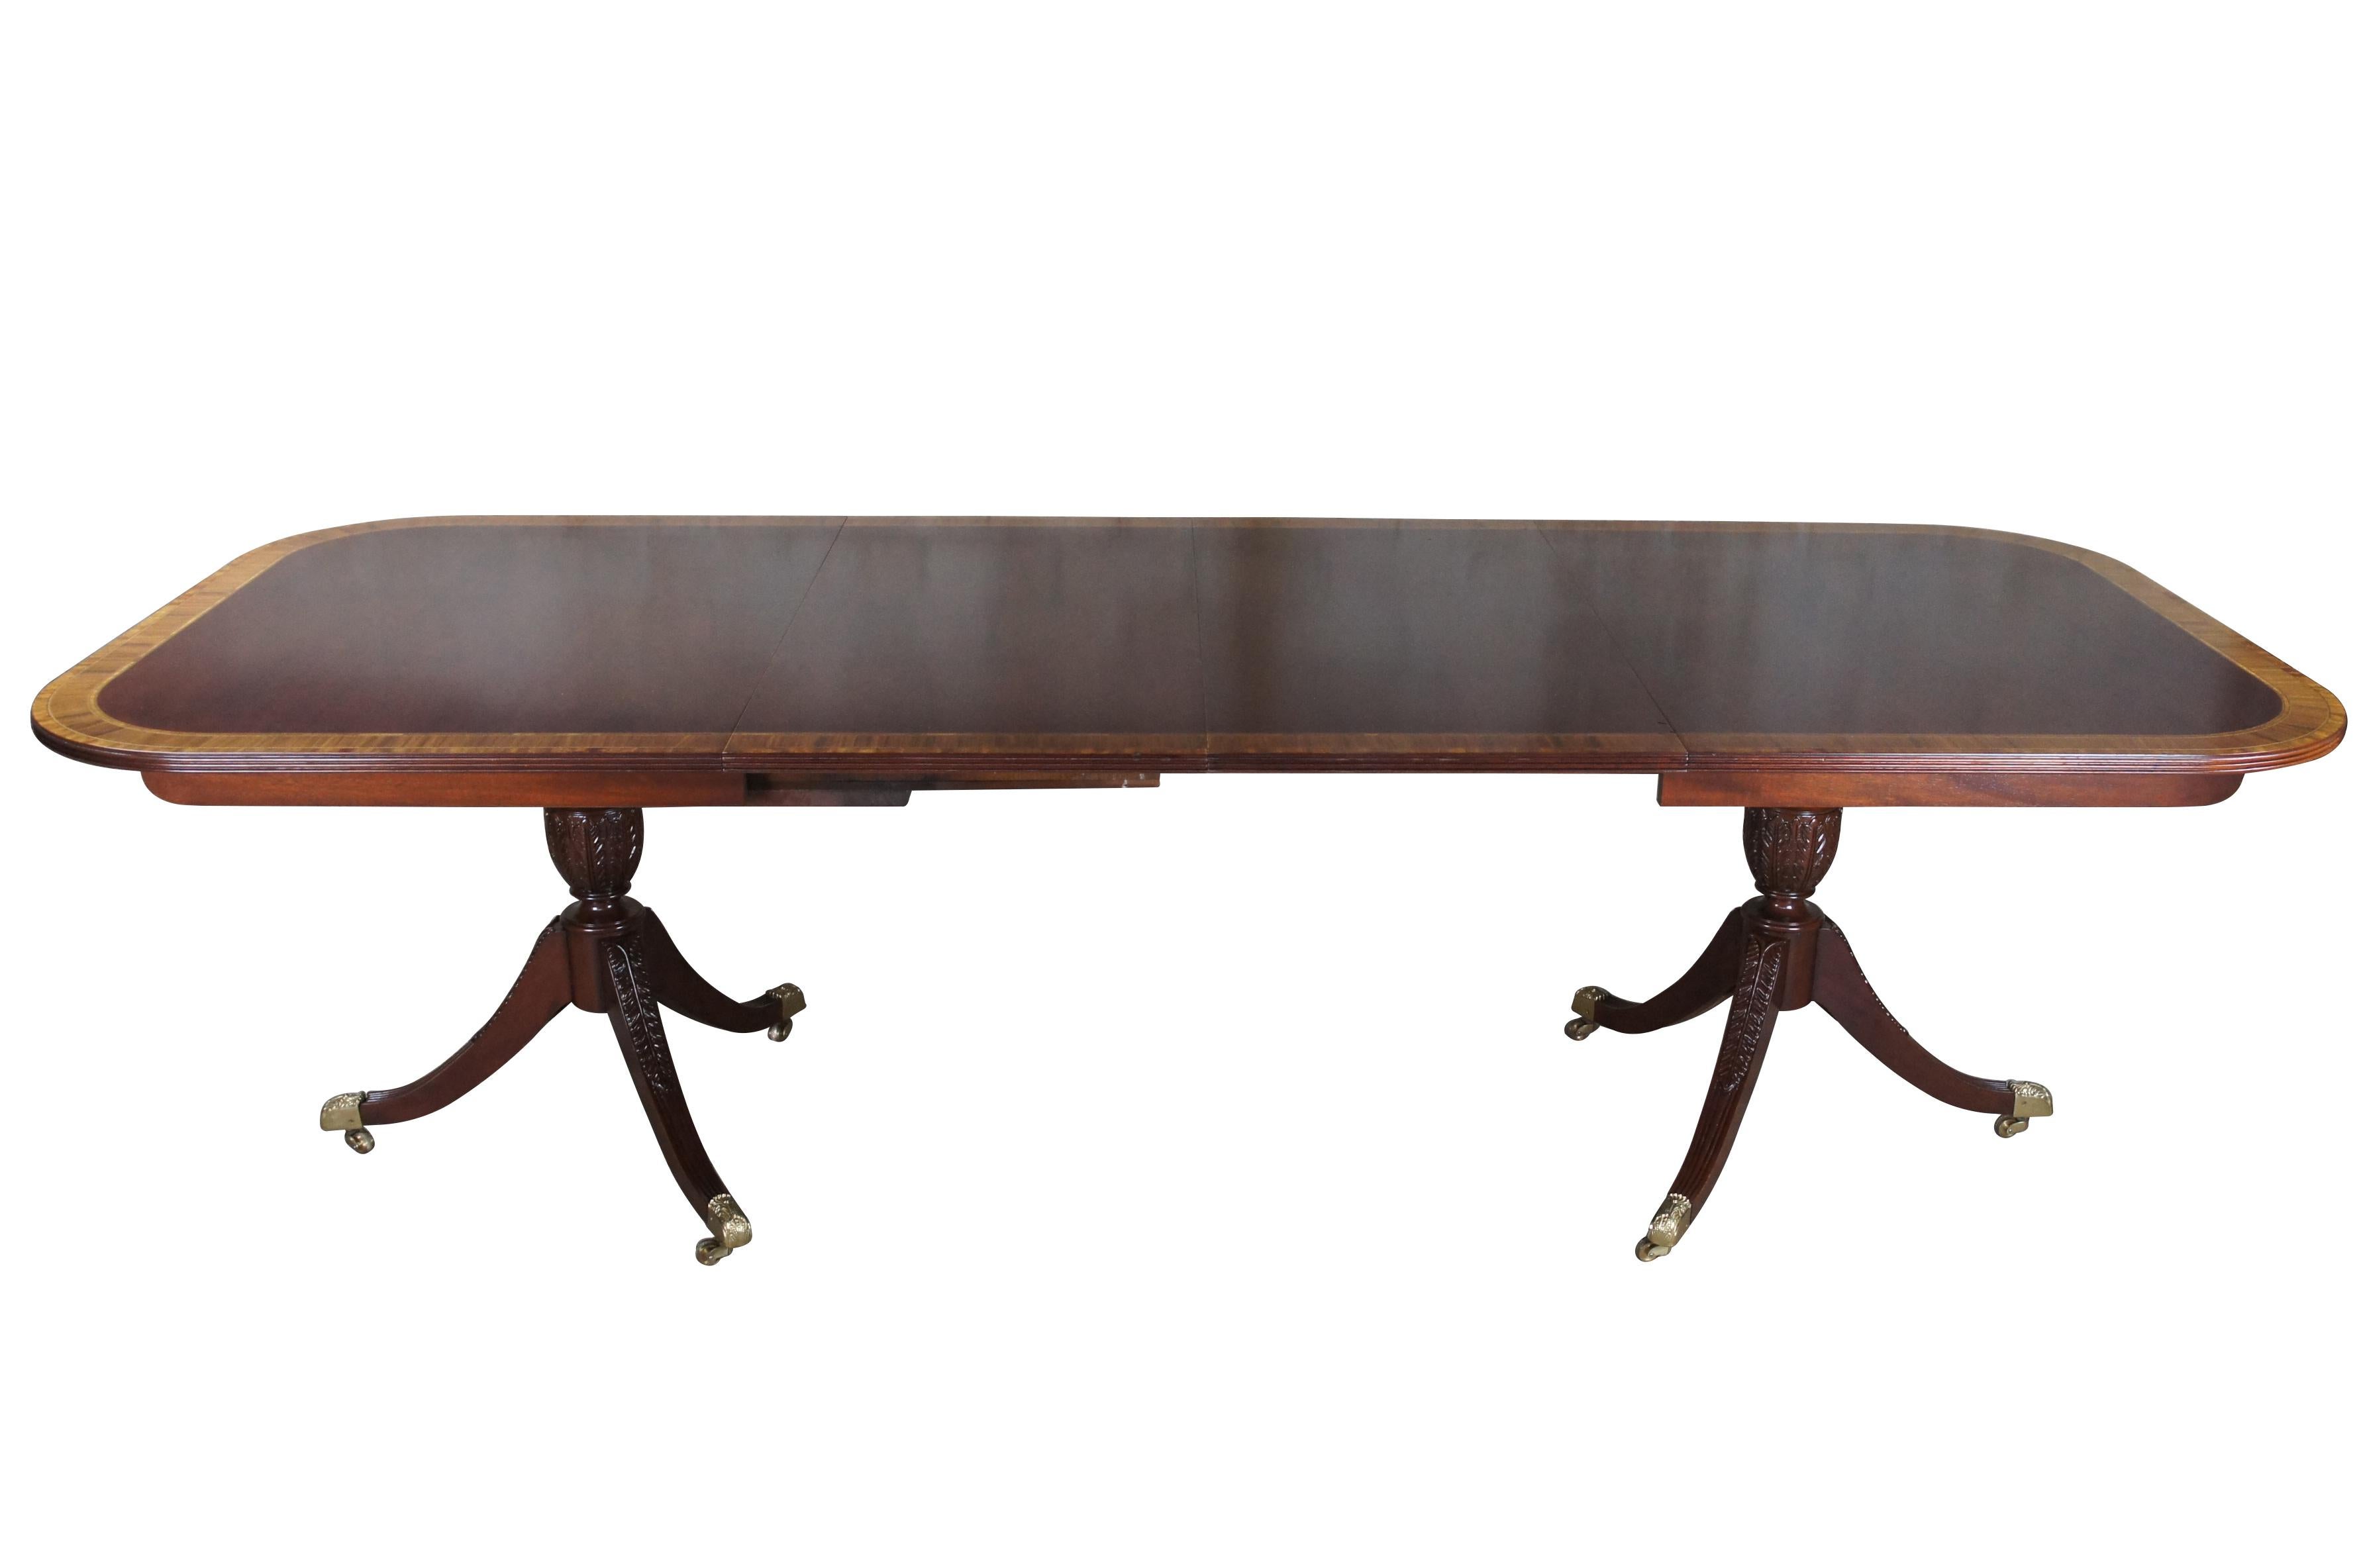 Baker Furniture English Regency style dining table. Features an impressive mahogany banded top with two leaves for extension and table pads. The table is supported by a double pedestal mahogany tripod base with shapely acanthus carved urns over